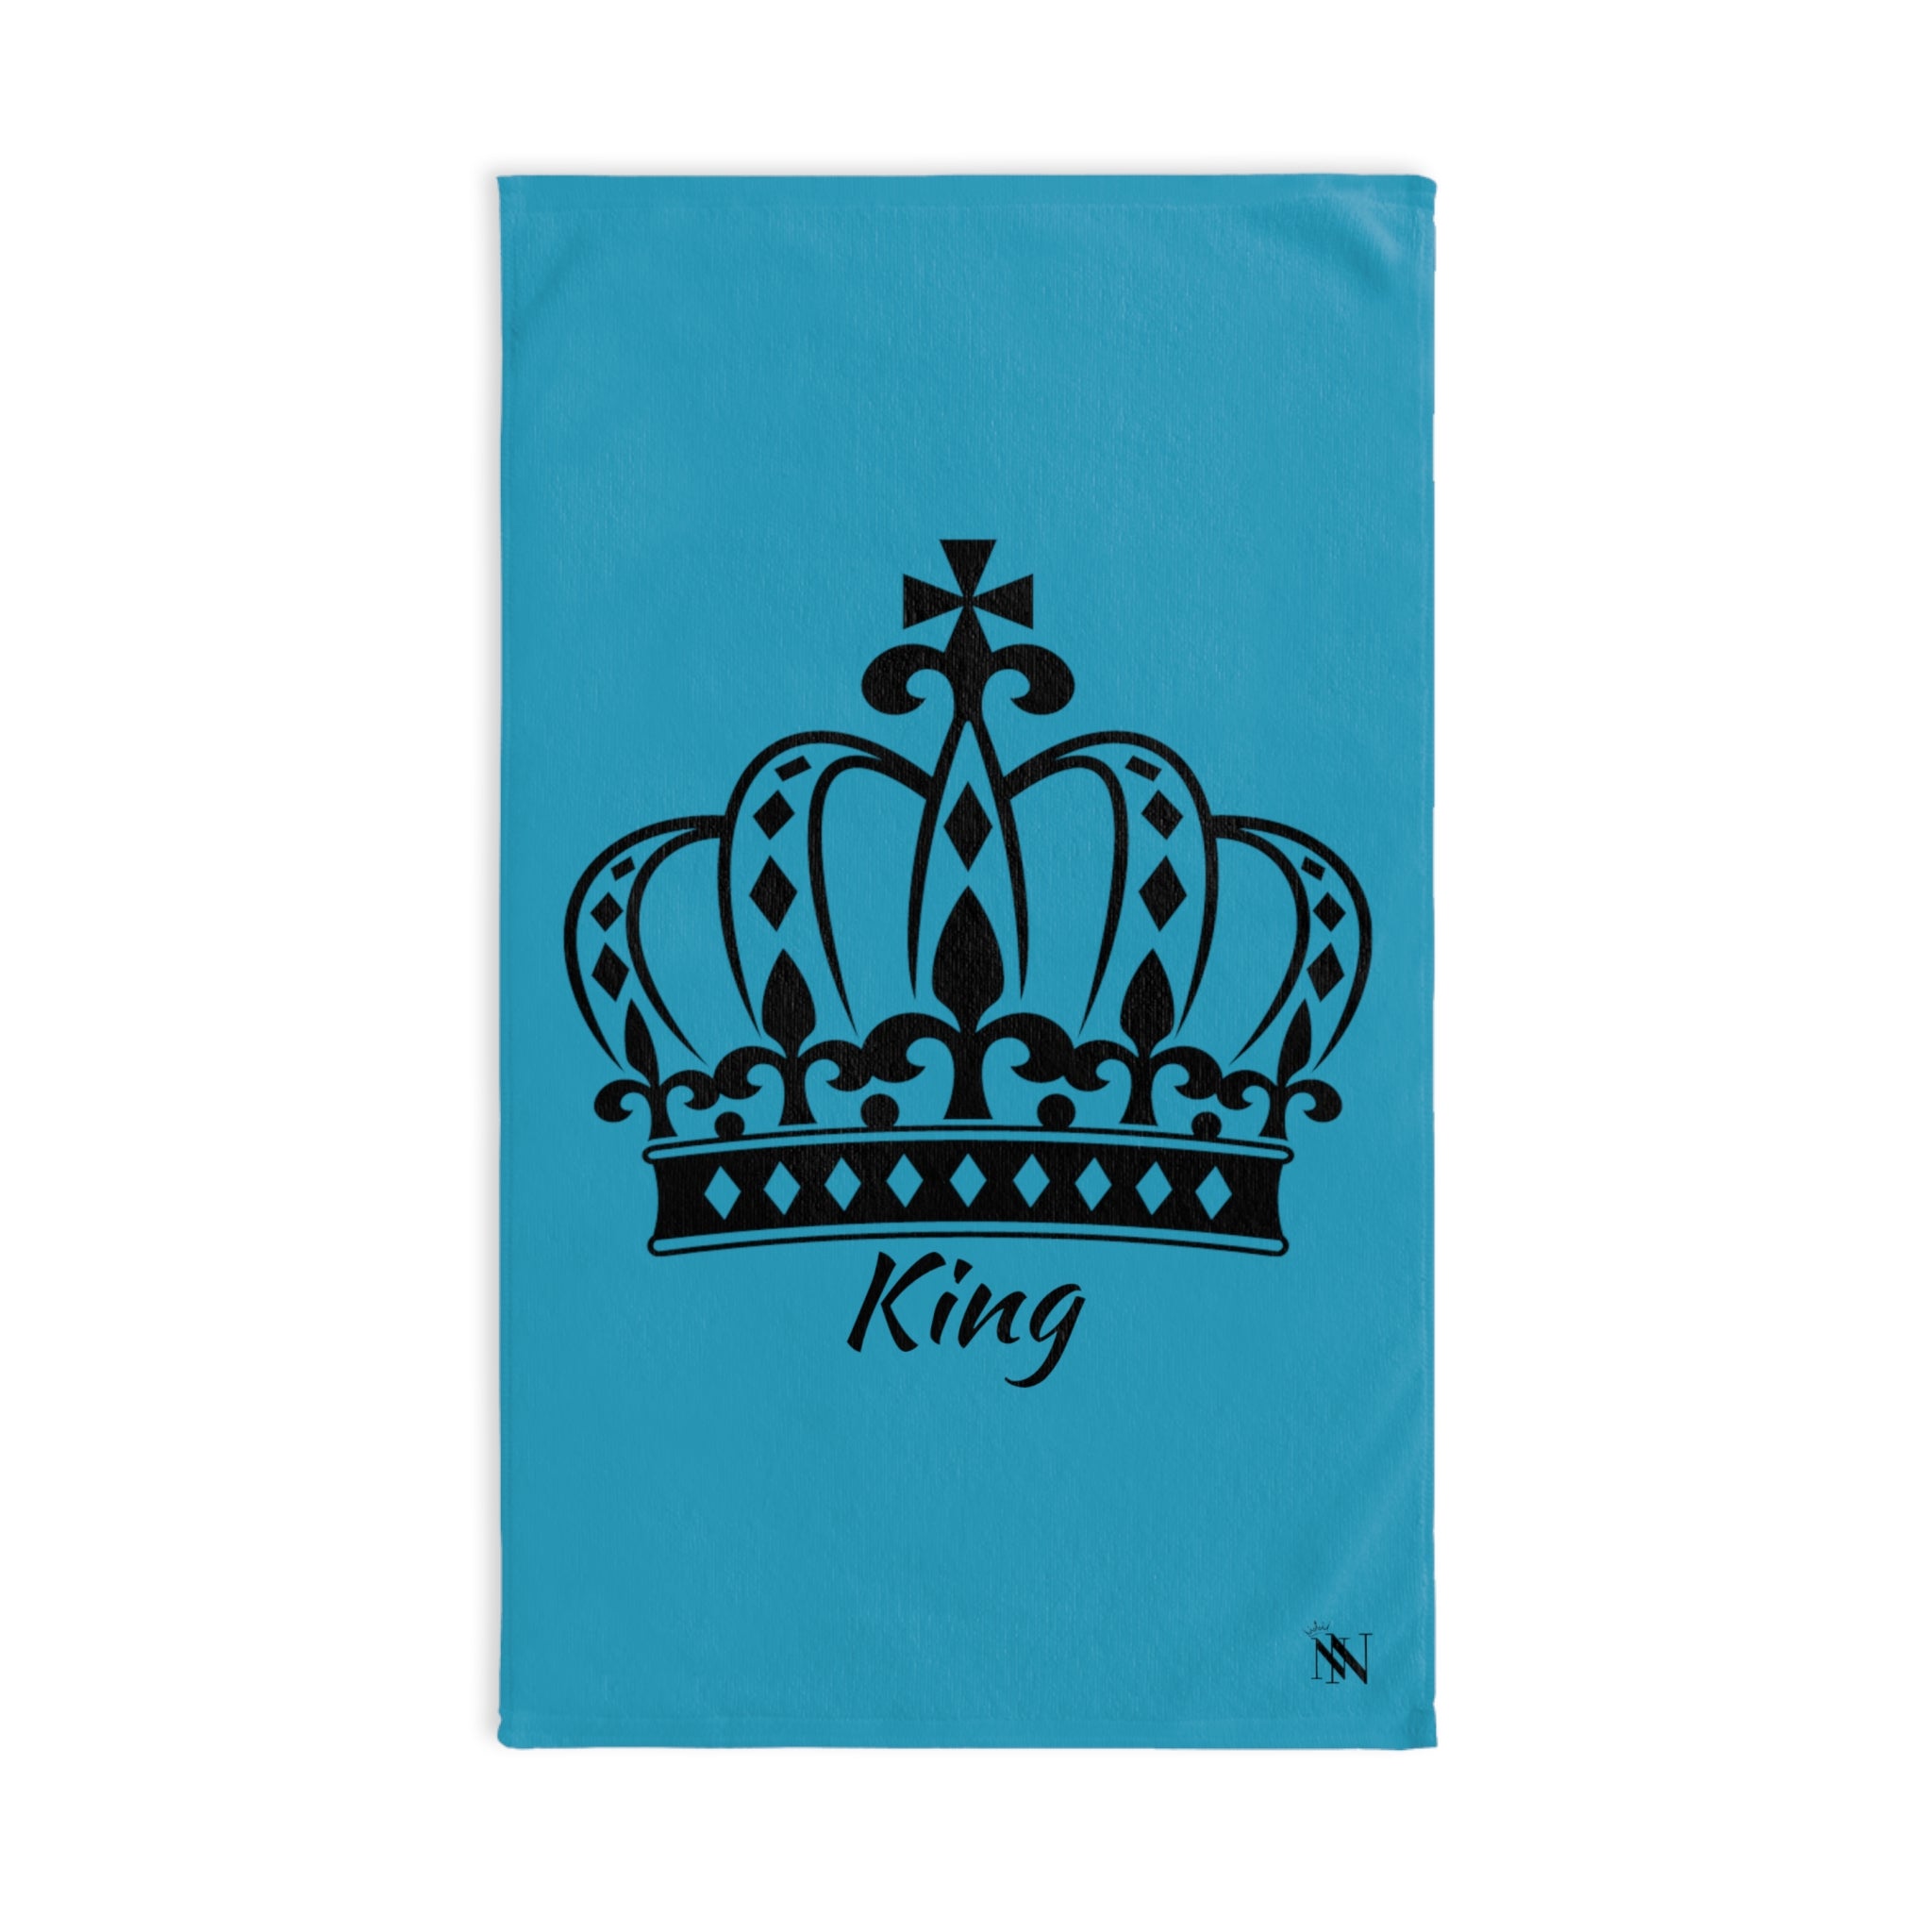 King Crown Prince Teal | Novelty Gifts for Boyfriend, Funny Towel Romantic Gift for Wedding Couple Fiance First Year Anniversary Valentines, Party Gag Gifts, Joke Humor Cloth for Husband Men BF NECTAR NAPKINS